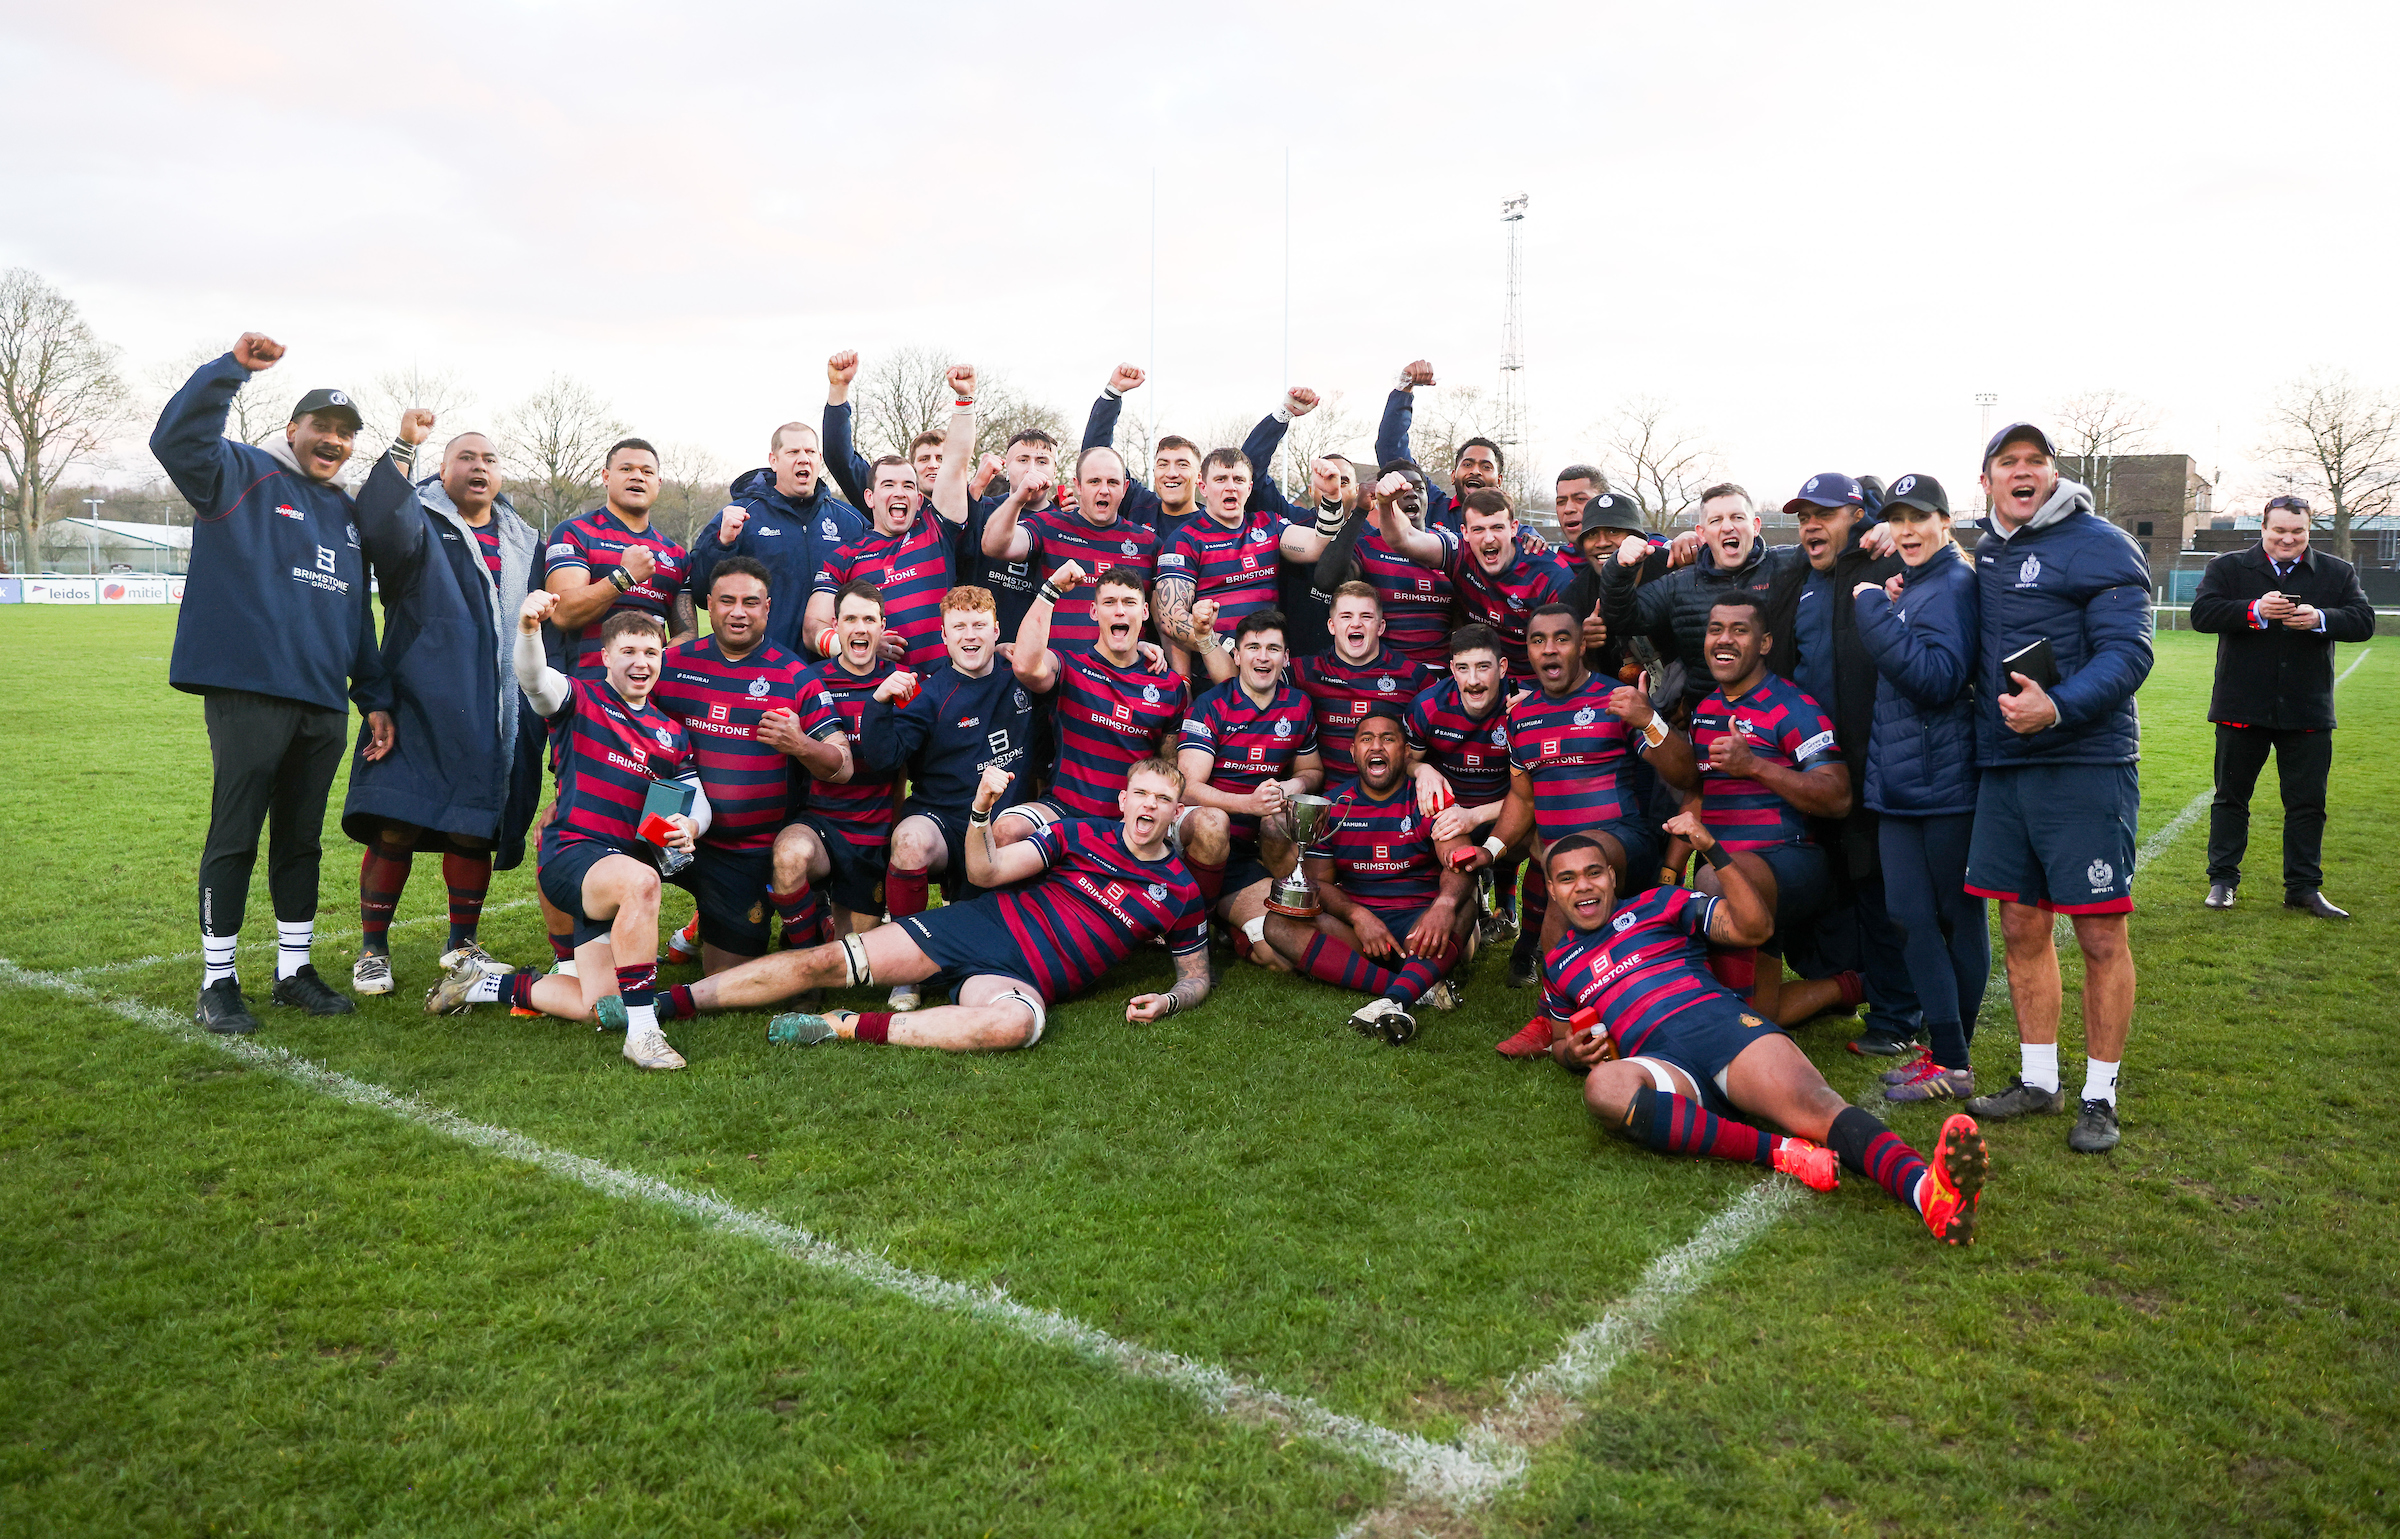 A three-peat for the Royal Engineers